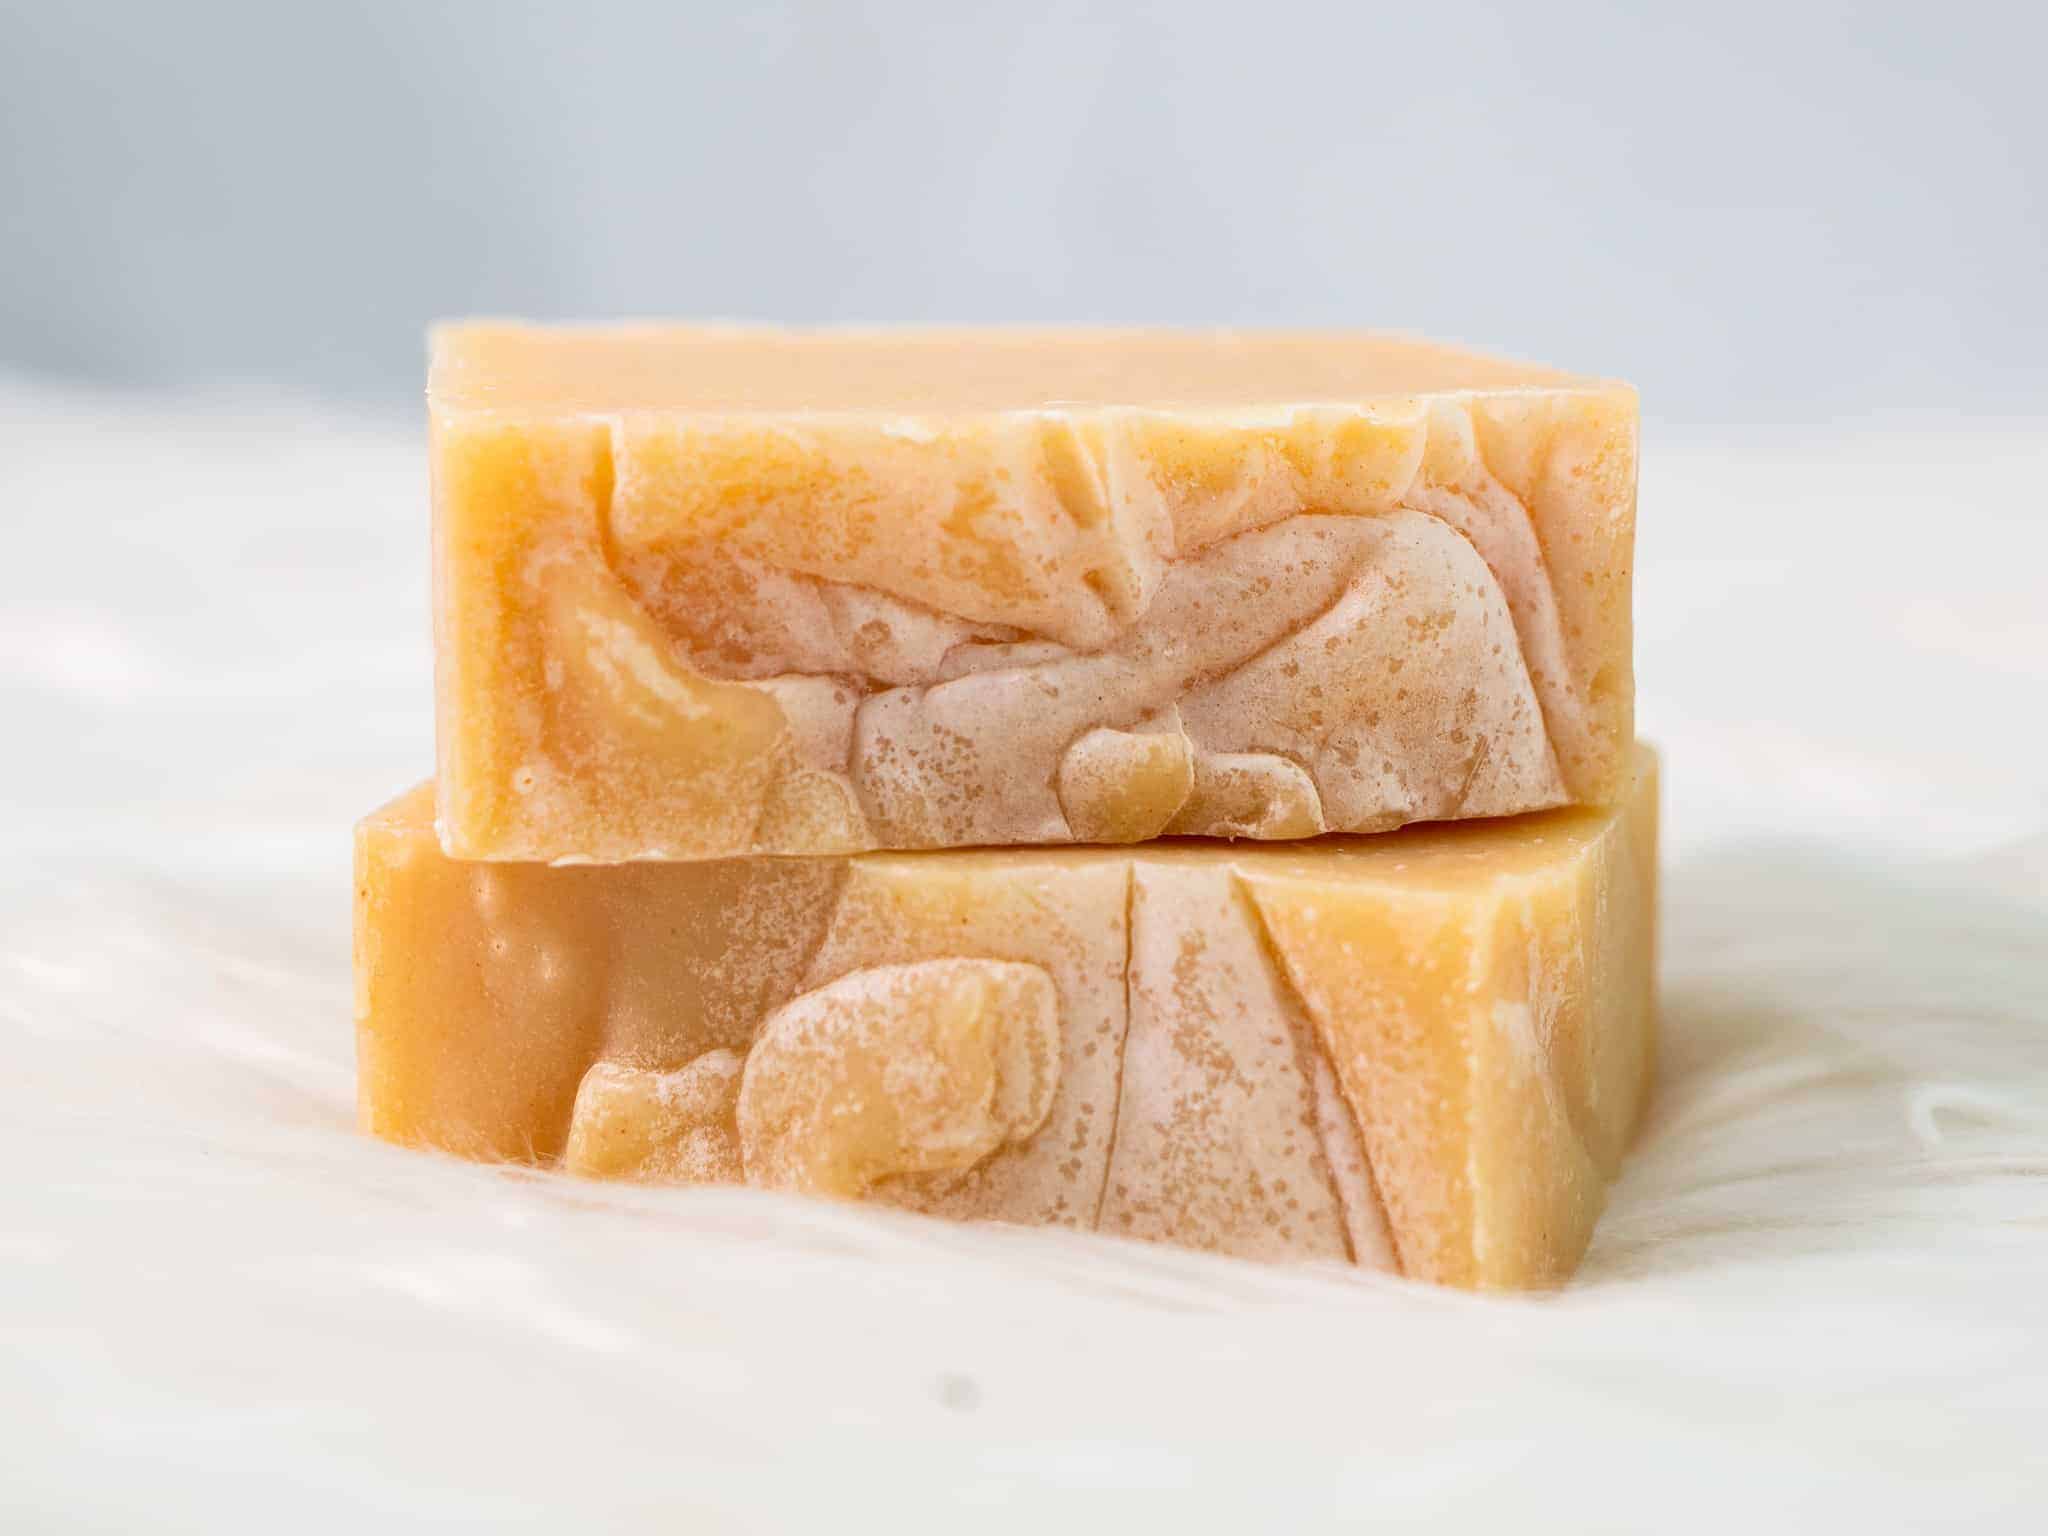 This Turmeric Soap- Vegan Specialty Bar is made with love by Sudzy Bums! Shop more unique gift ideas today with Spots Initiatives, the best way to support creators.